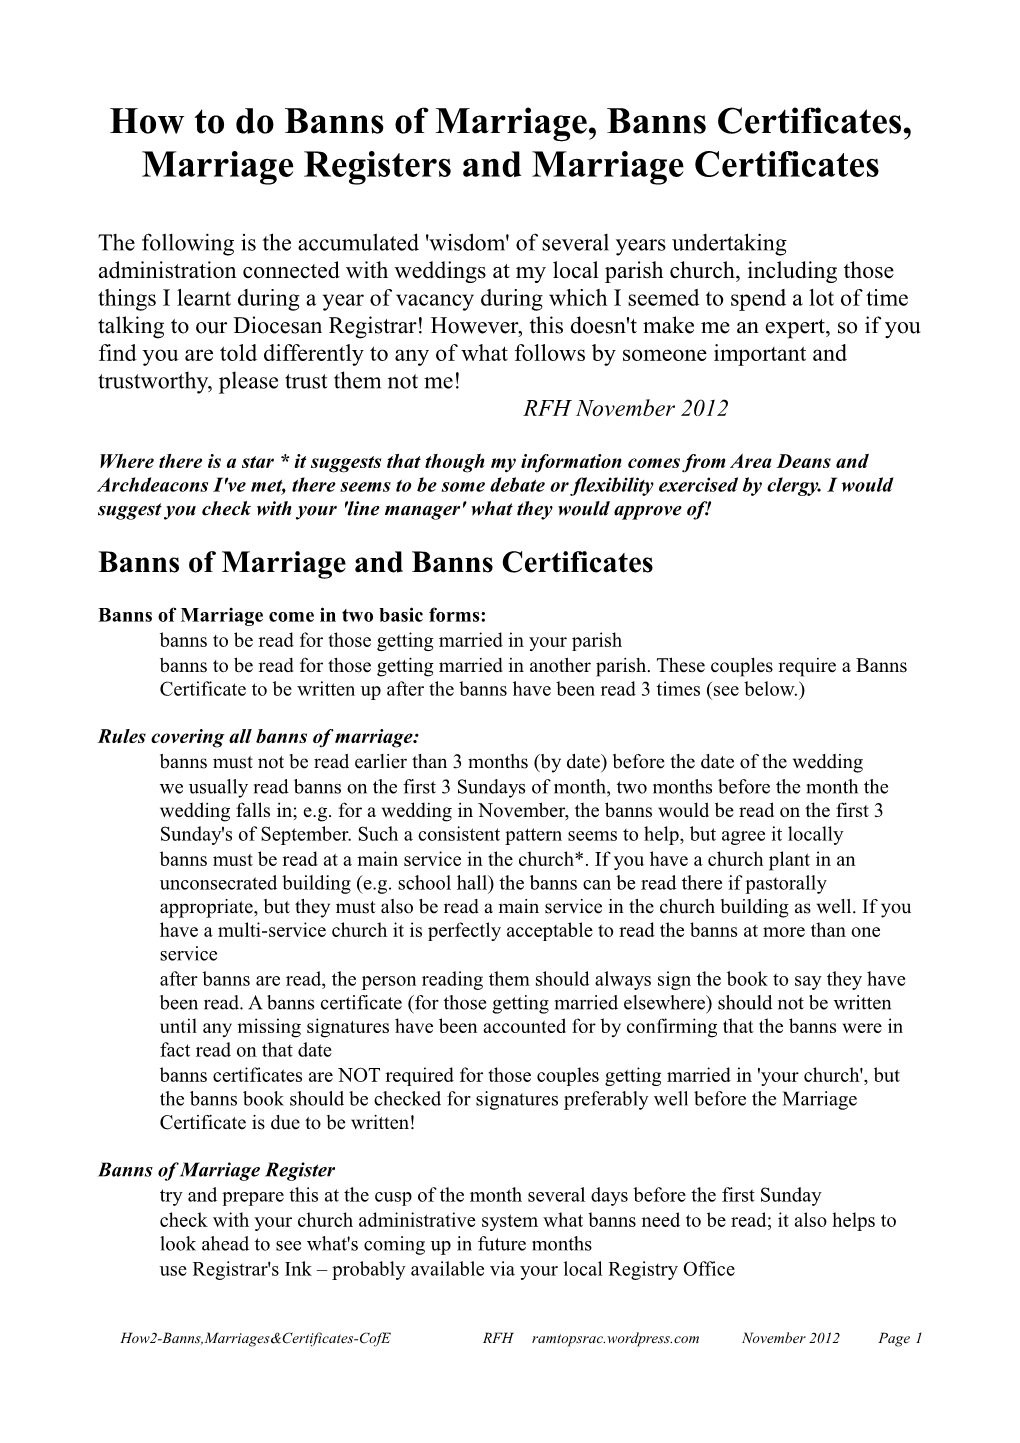 Banns of Marriage and Banns Certificates